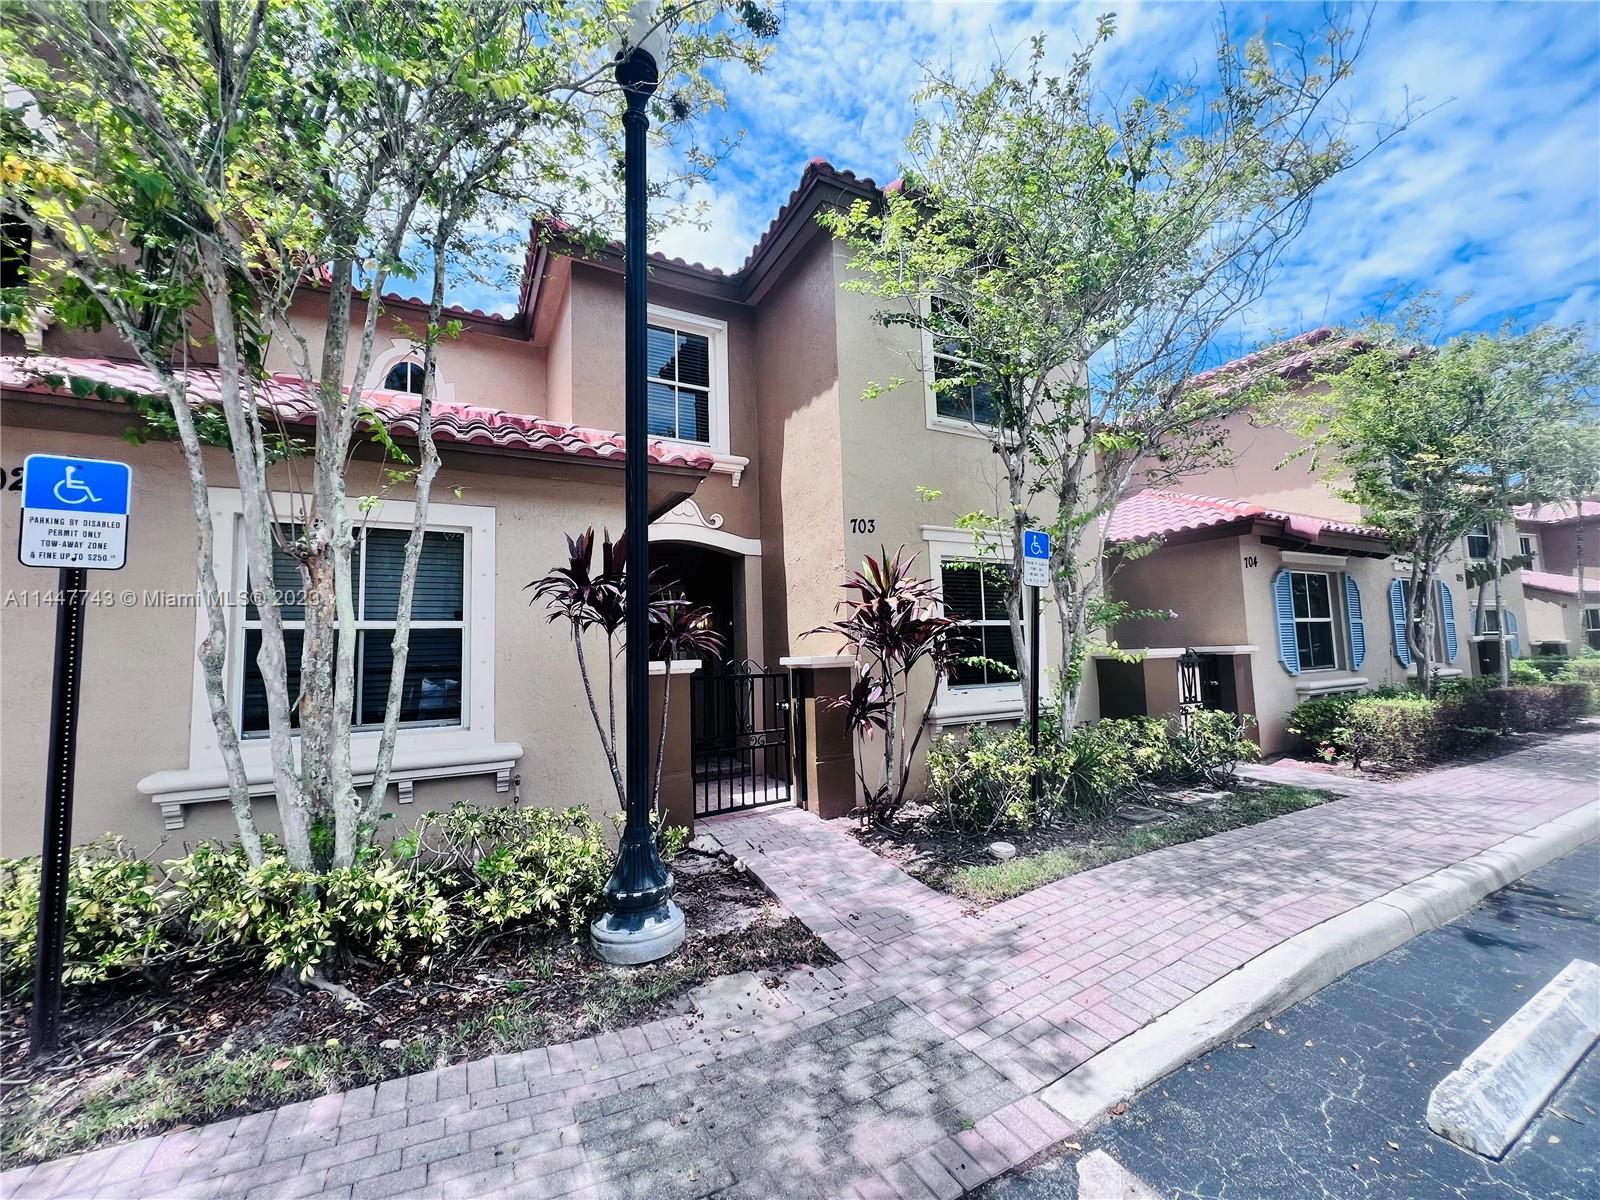 This exclusive townhouse in the tranquil Emerald Dunes community, close to the Florida Turnpike, off